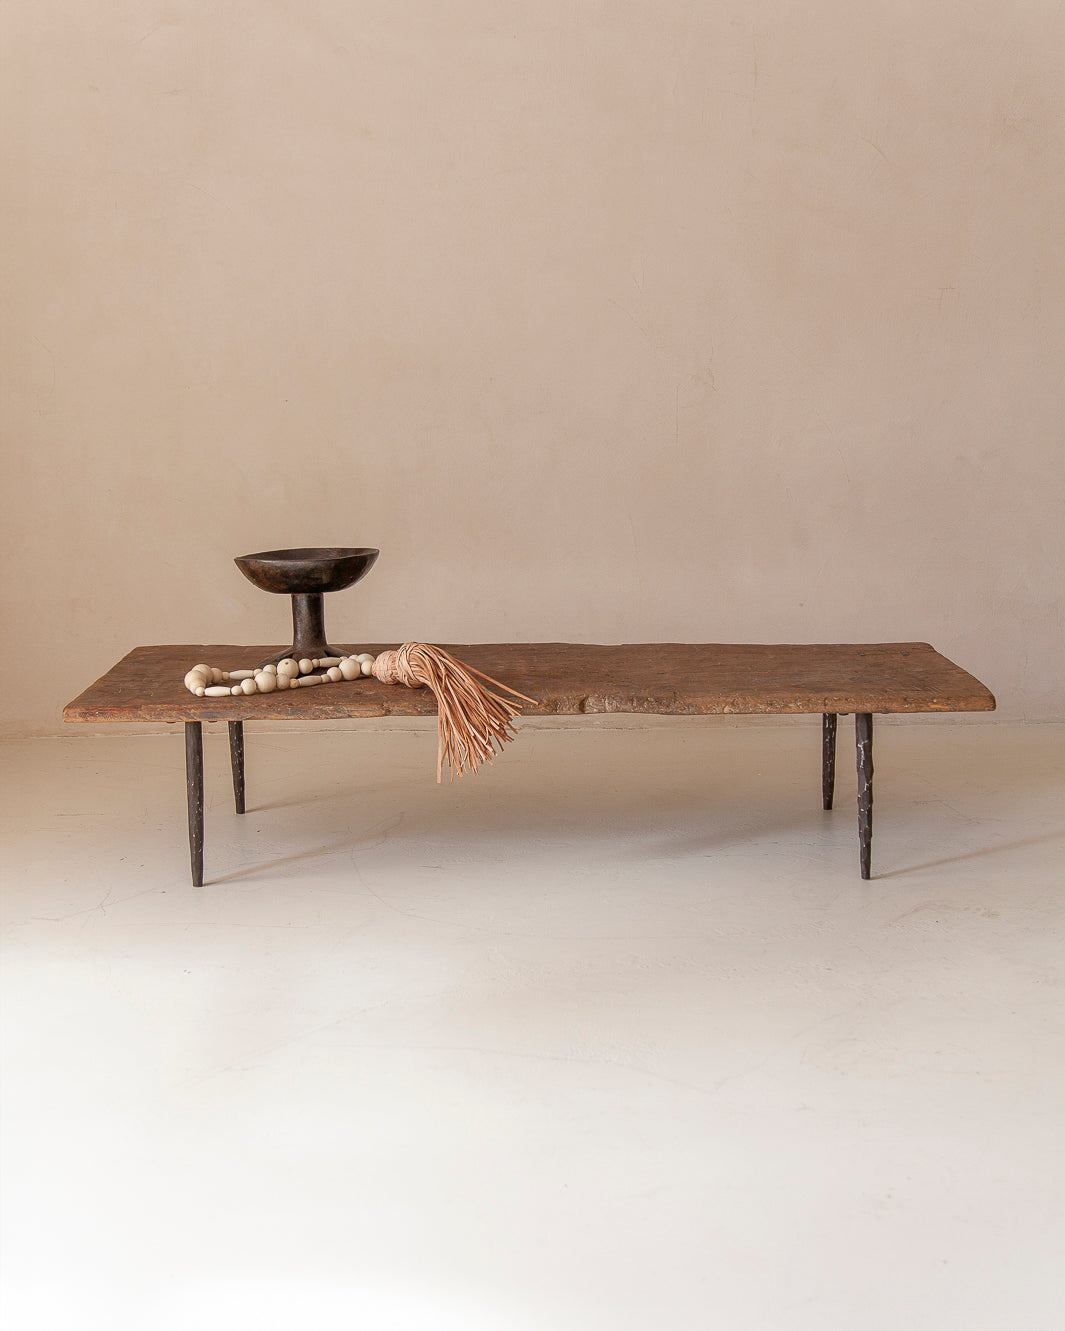 Chinese table from the 1930s, 165x59x35 cm